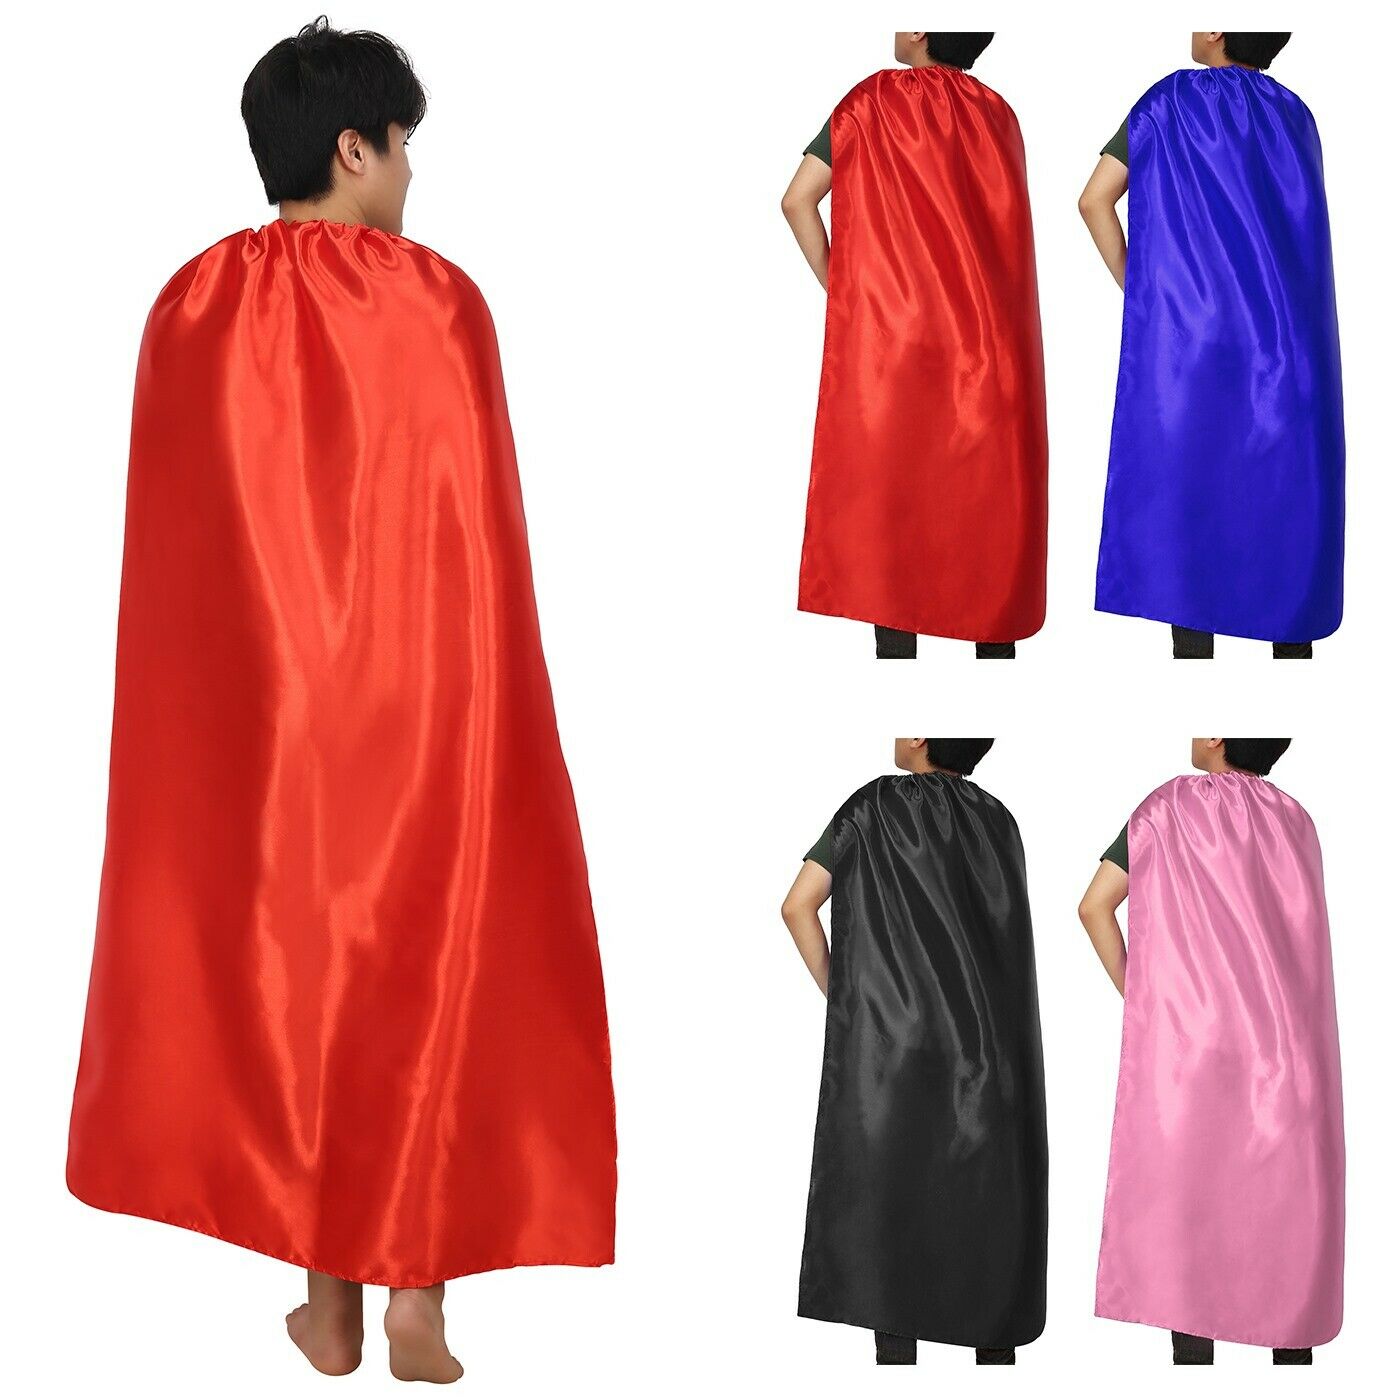 Adult Superhero Cape Halloween Costume Cosplay Accessory (55 Inches Long)